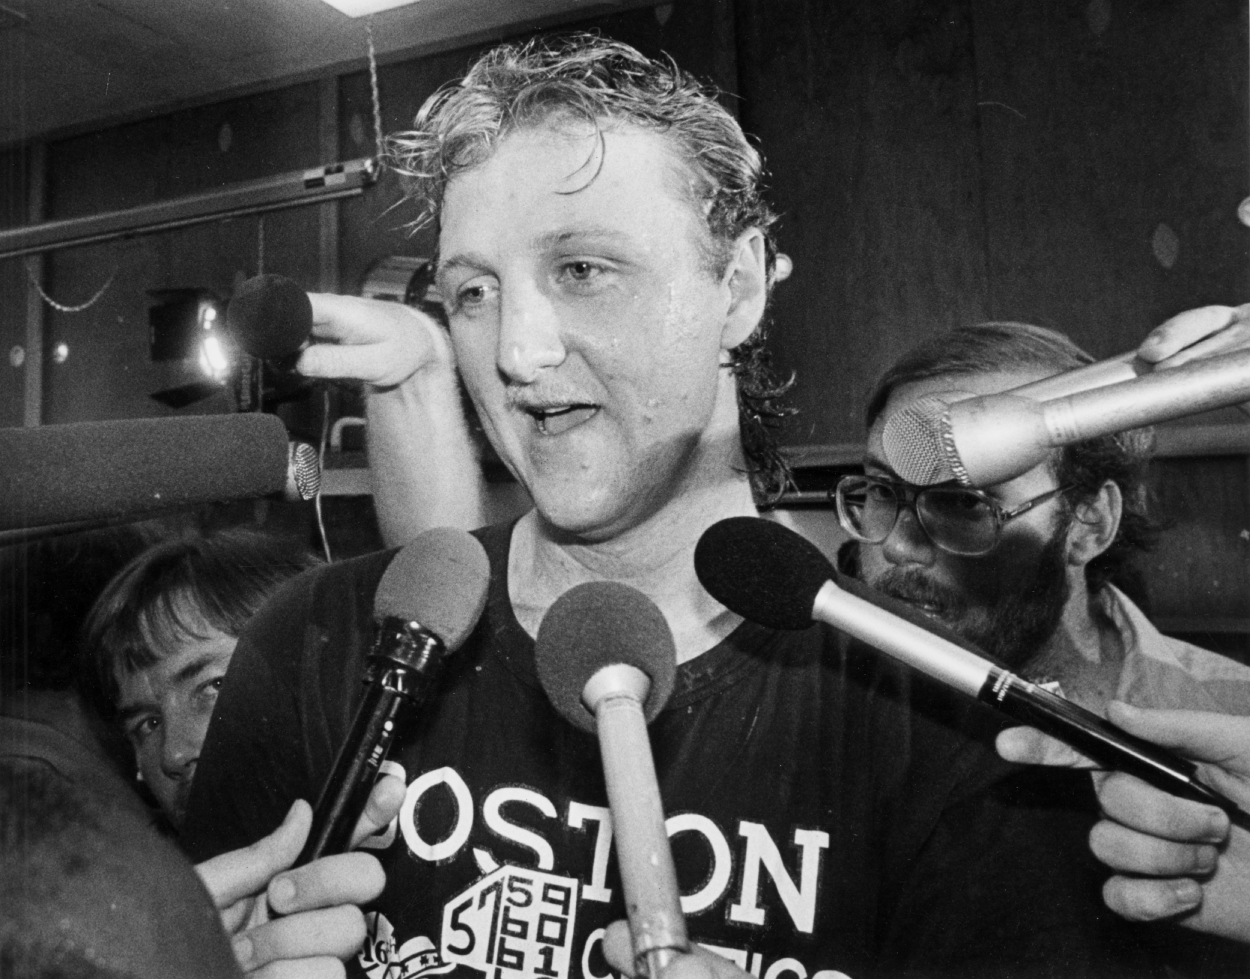 Larry Bird talks to the press in the locker room after winning a game against the Houston Rockets on June 8, 1986.